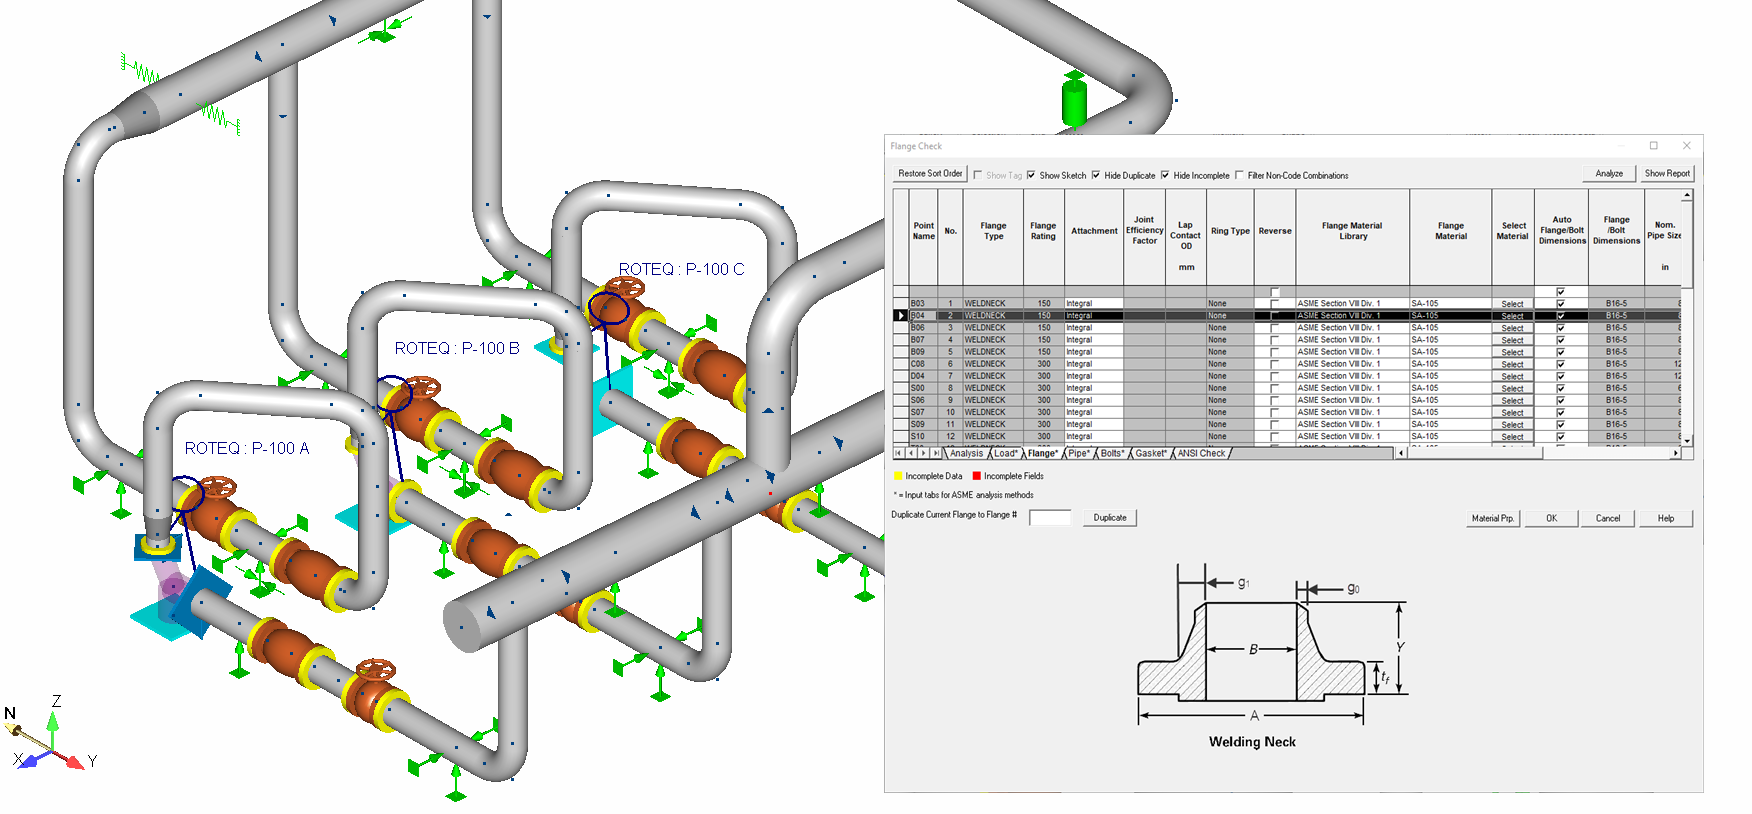 Flanges can be easy verified. Dimension DB is included in the software